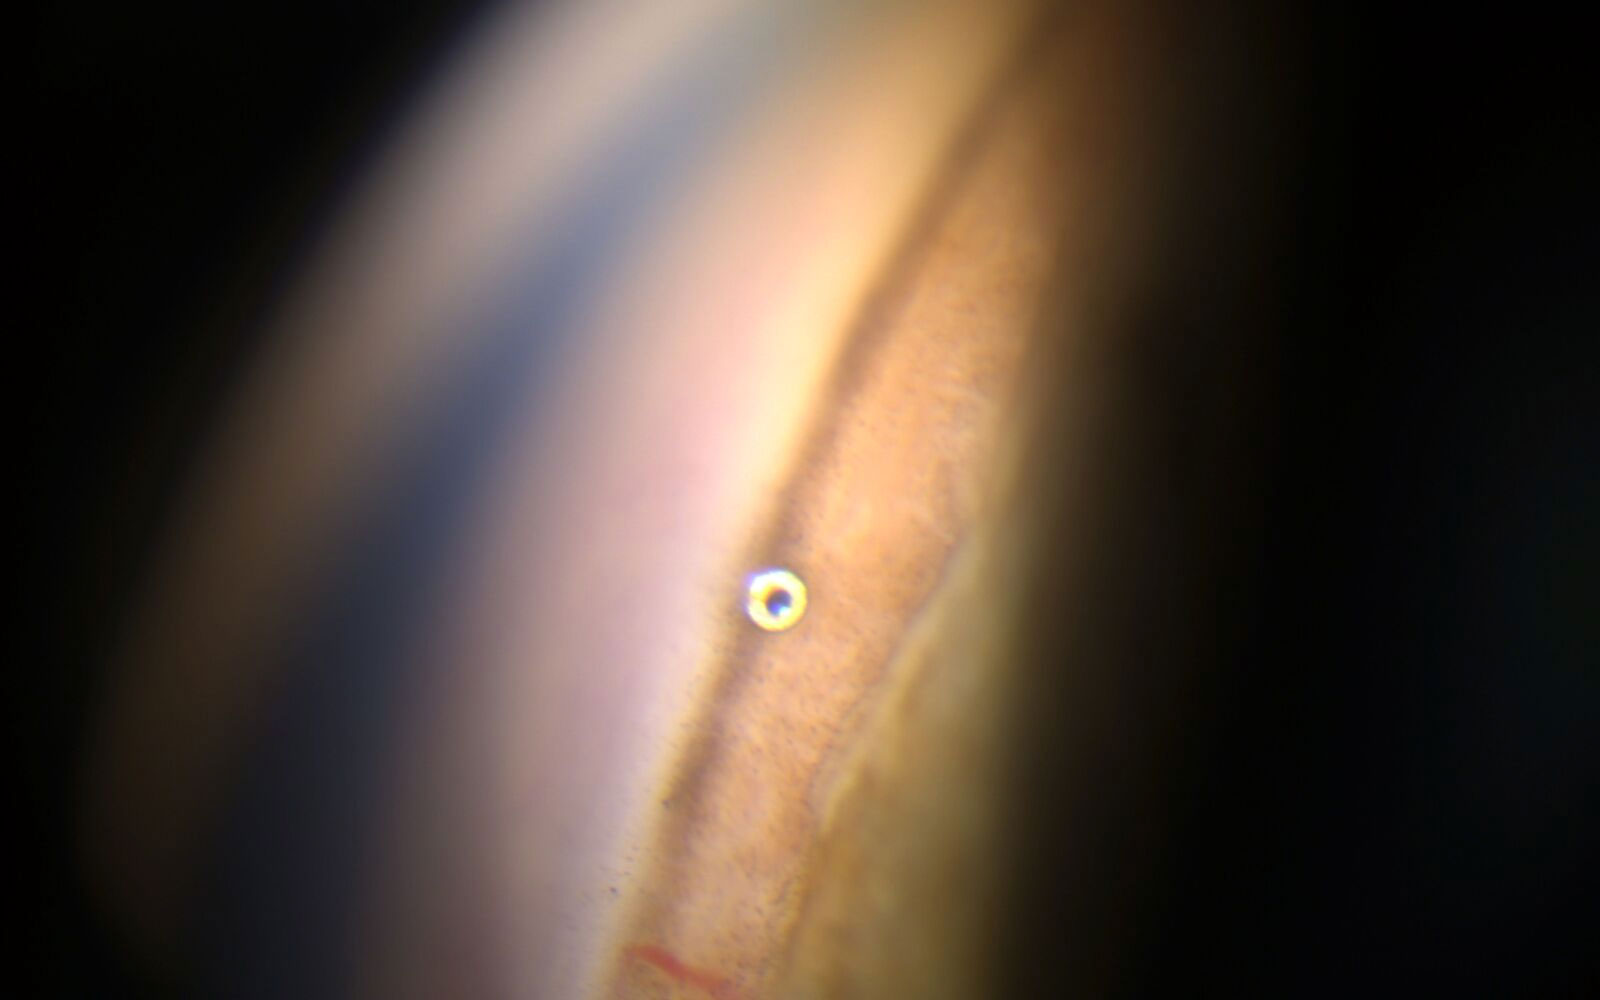 A microscopic trans-trabecular drainage stent used in glaucoma management